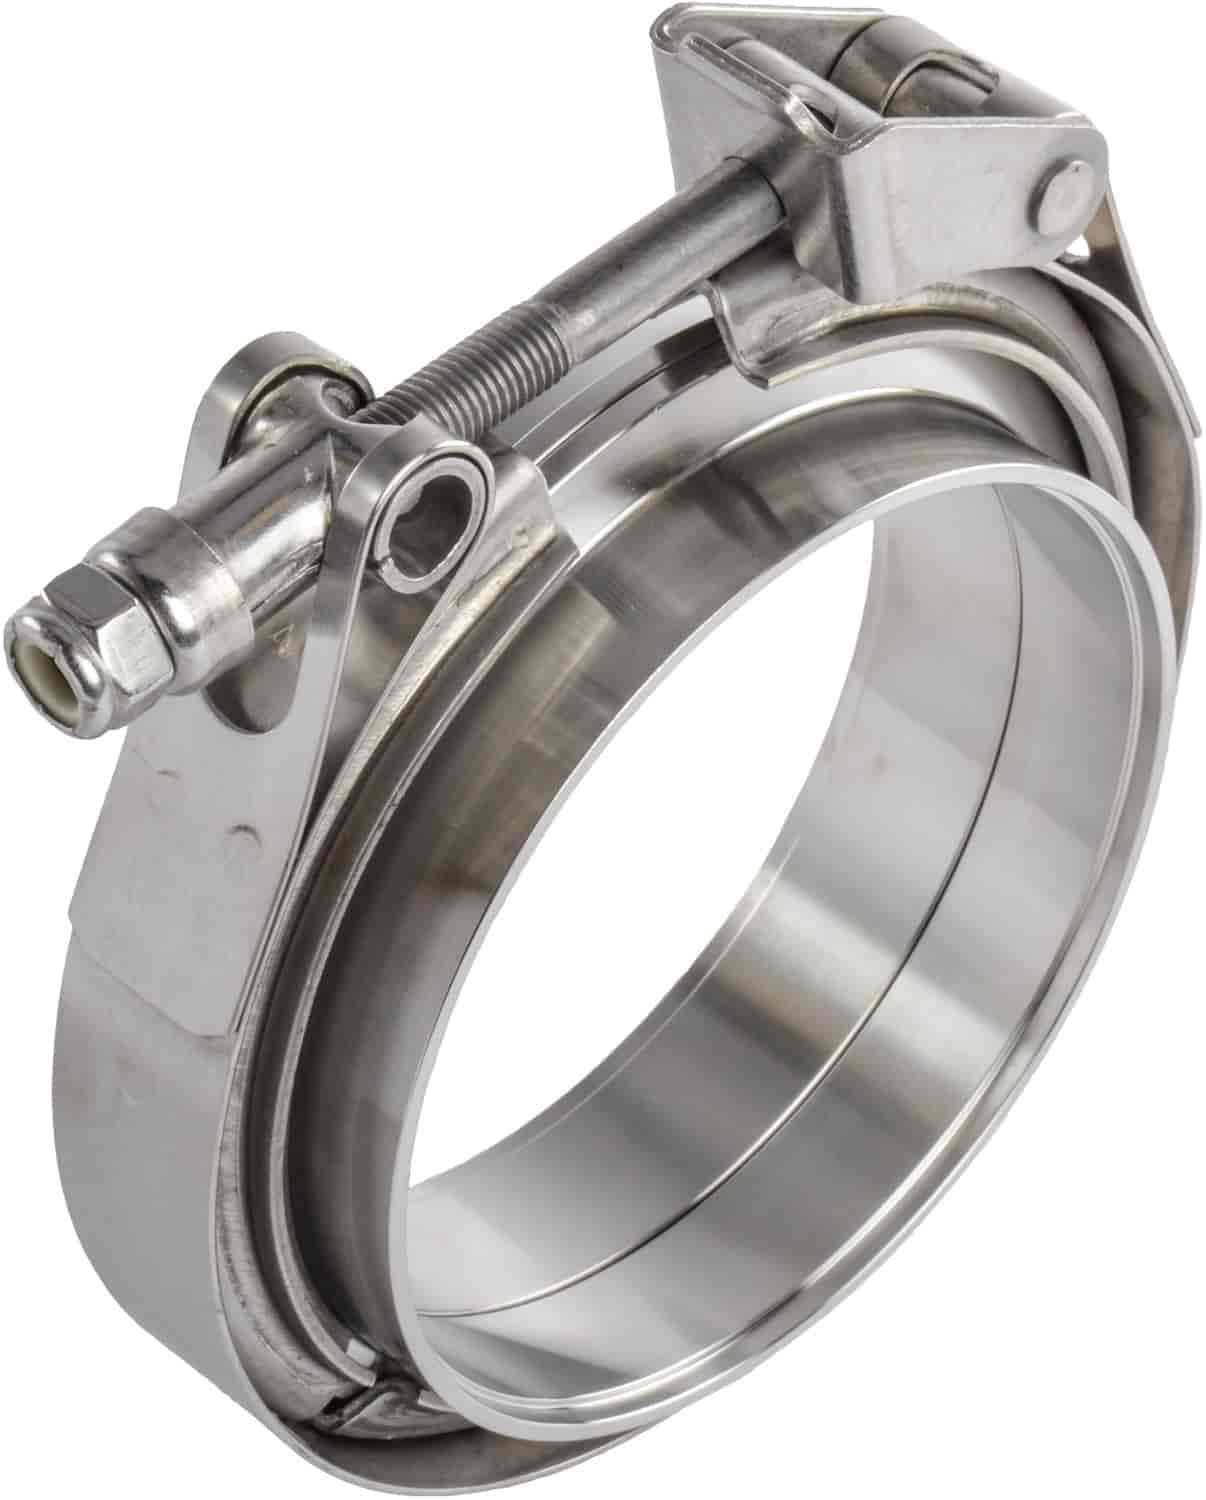 Stainless Steel Quick Release V-Band Clamp & Flanges 4 in.